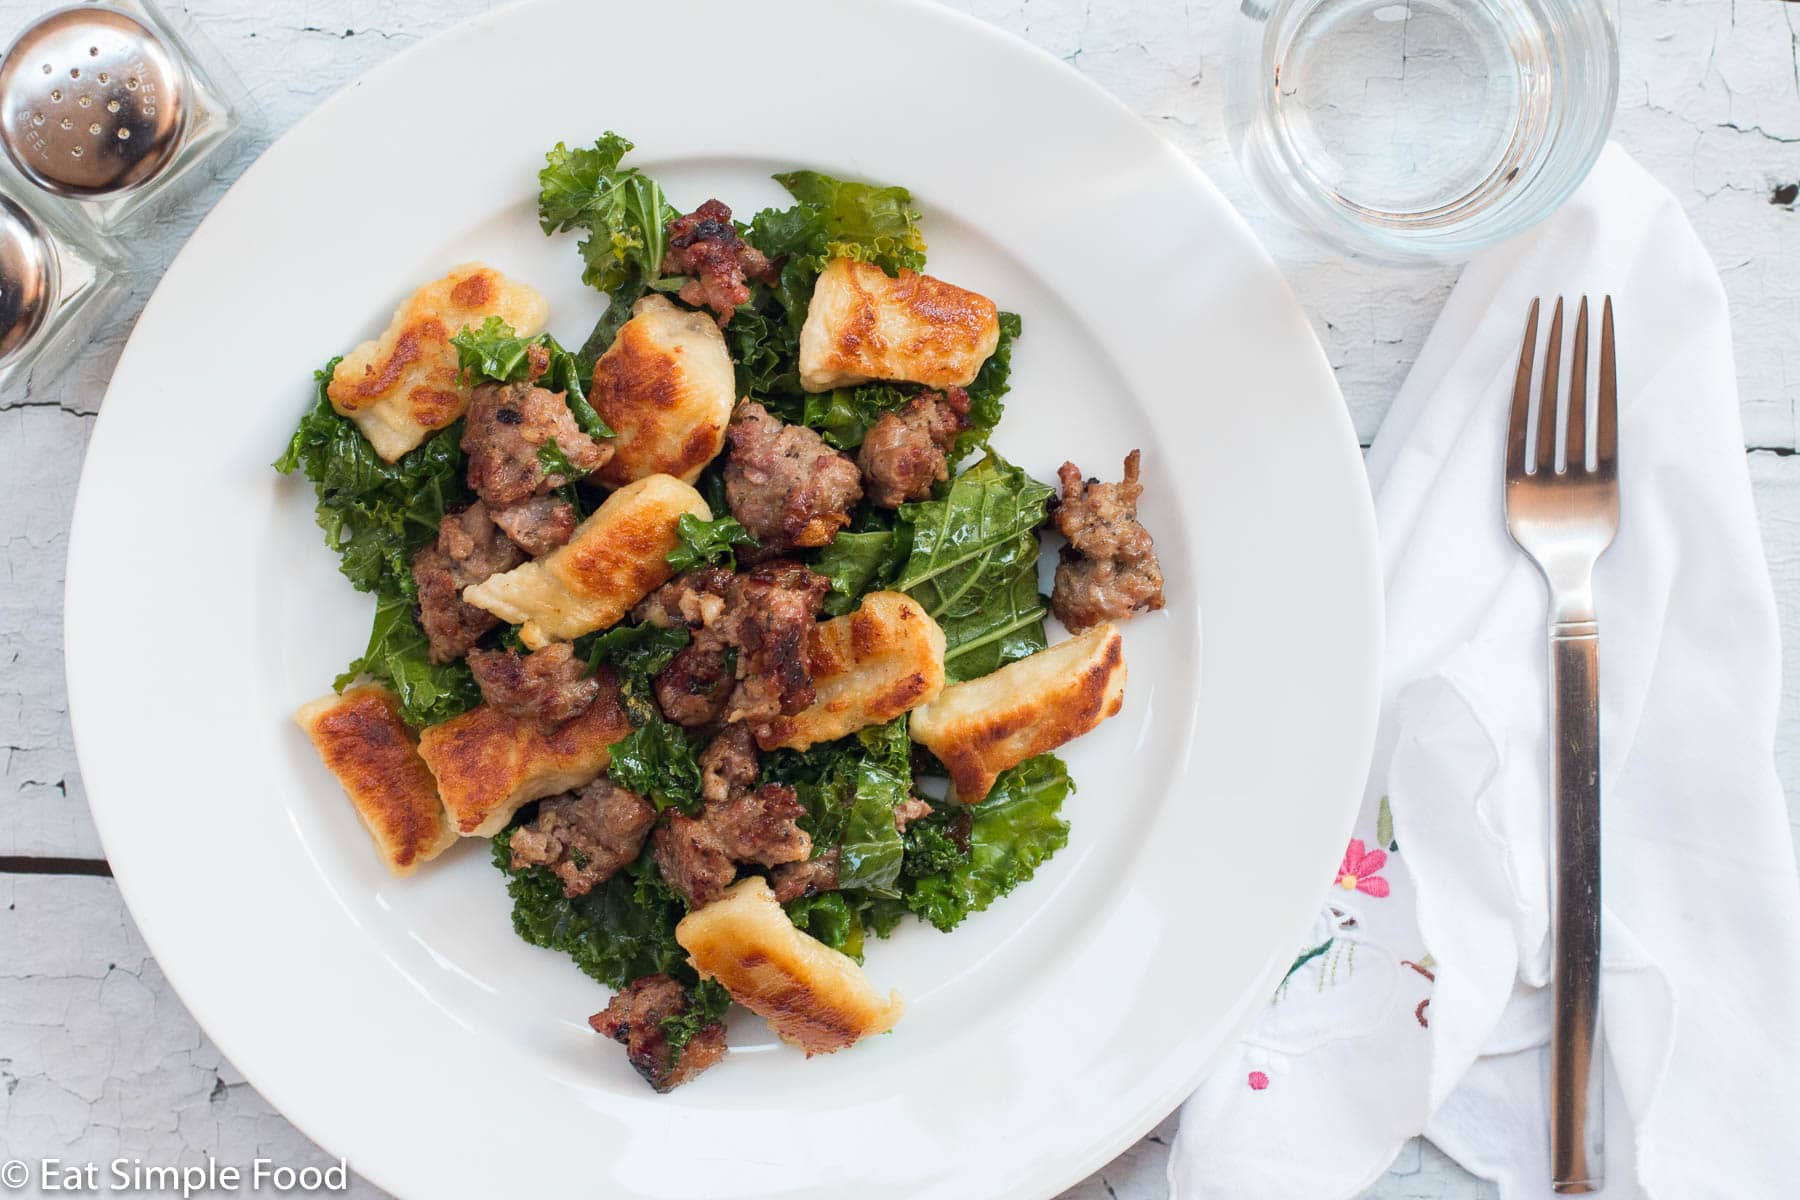 ¾ of a plate filled with browned gnocchi, sautéed kale, and ground sausage. On a white plate with a white napkin with small colorful flowers. Top view.